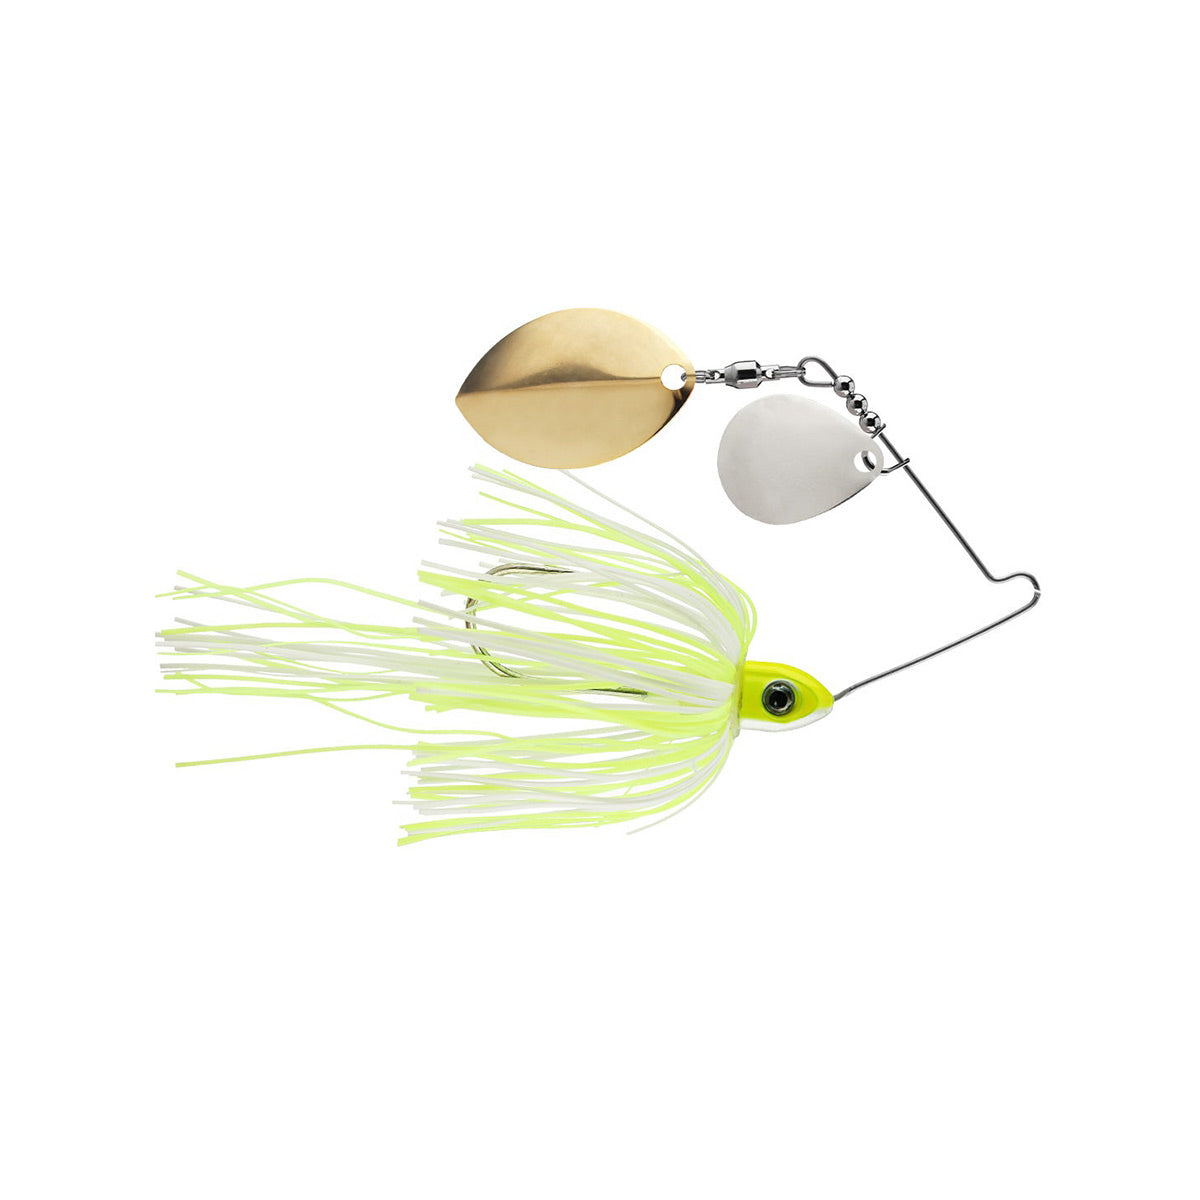 Rapid Fire Double Willow Spinnerbait_Chartreuse White - Nickel/Gold